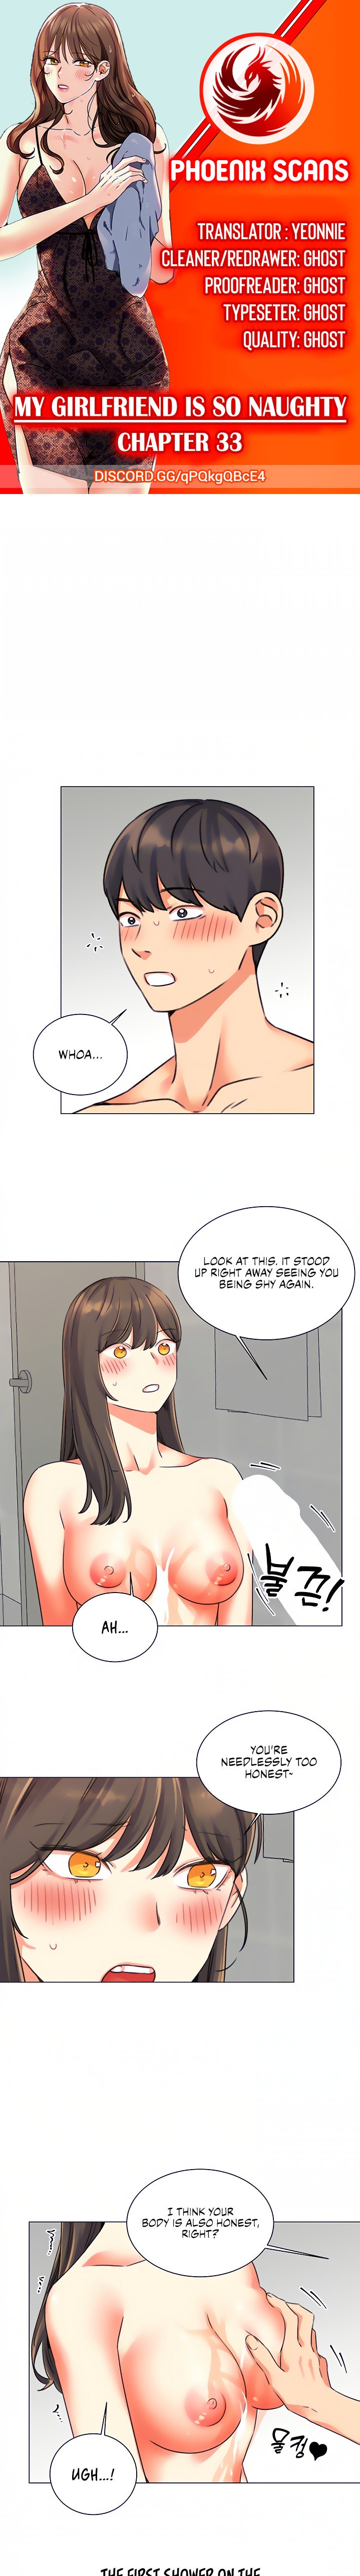 My girlfriend is so naughty Chapter 33 - Page 1